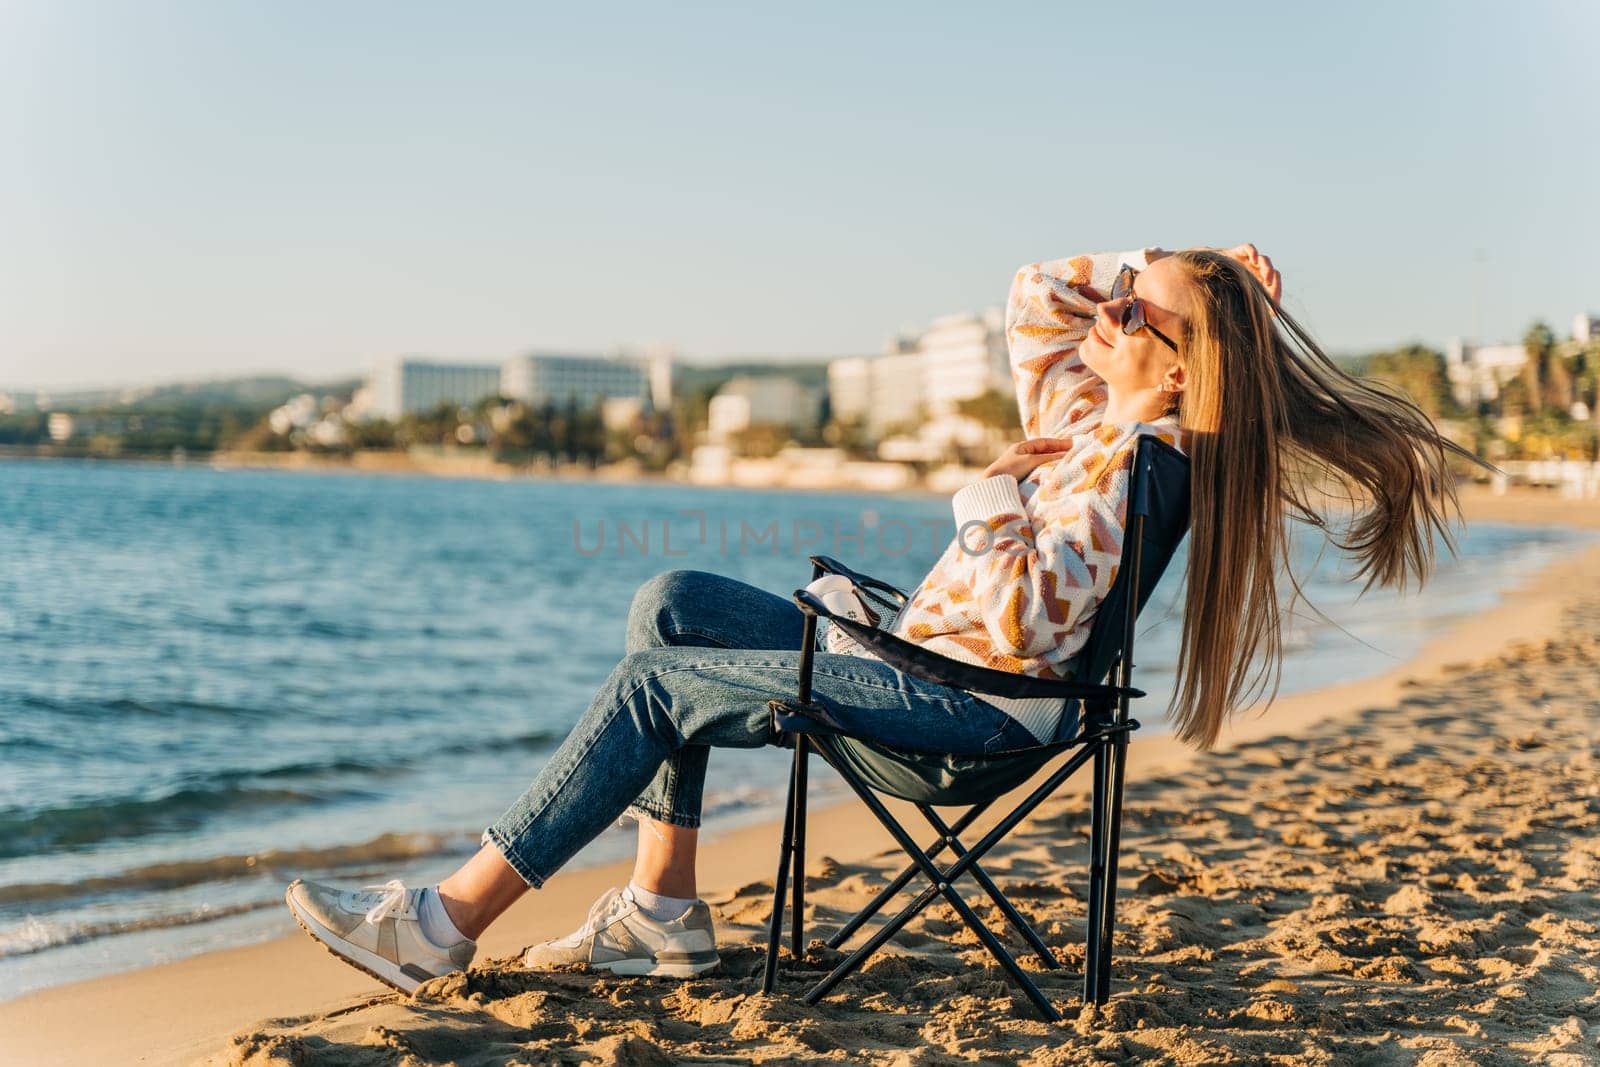 Beautiful young girl in cozy sweater and sunglasses stretching while sitting on foldable chair on winter beach sand. Woman enjoying autumn ocean fall sunset view while wind blowing her hair by Ostanina